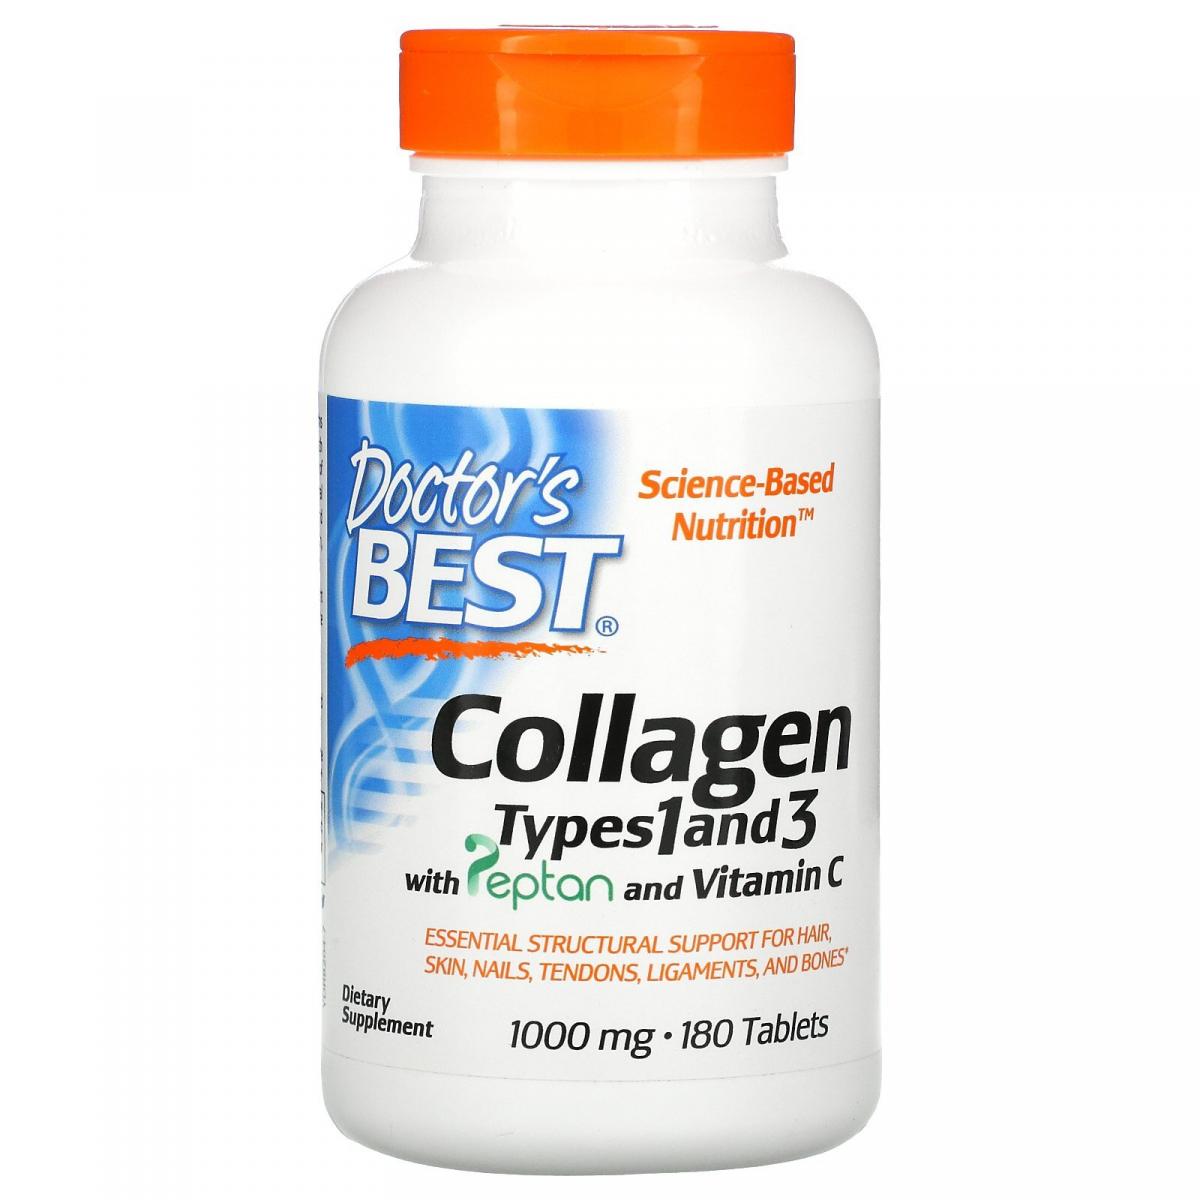 Doctor's Best Collagen Types 1 and 3 with Peptan and Vitamin C 1,000 mg 180 Tablets